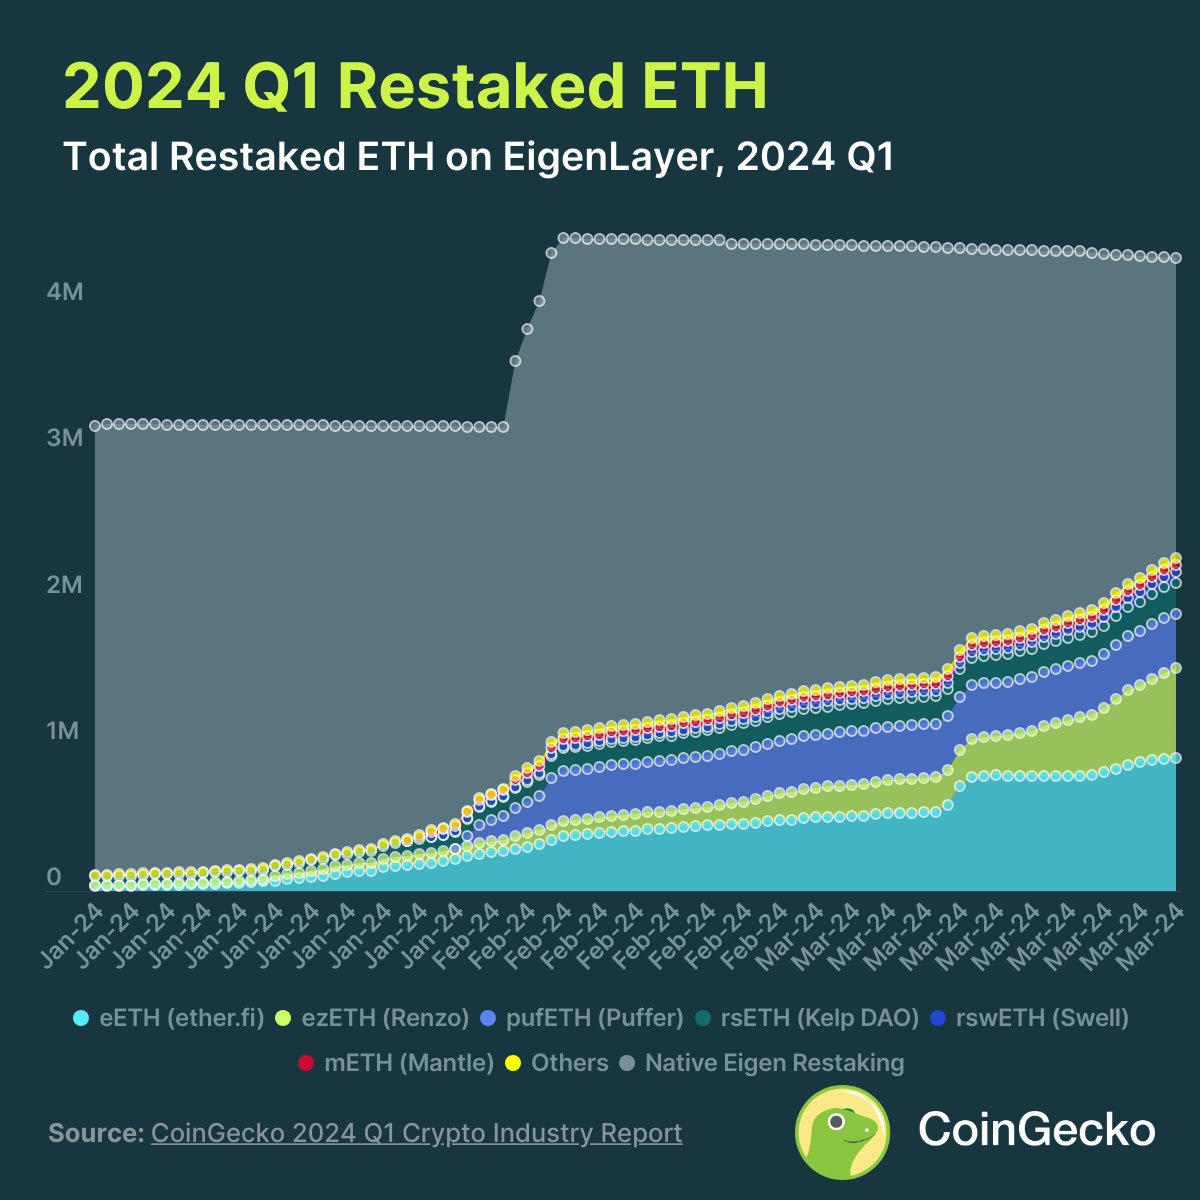 3/ Ethereum restaking on EigenLayer grew by 36% ↗️ • Total number of restaked $ETH on @EigenLayer reached 4.3M in Q1. • The majority (52.6%) of restaked $ETH, totalling 2.28 million, were held by Liquid Restaking Protocols, with @ether_fi emerging as the largest LRT protocol.